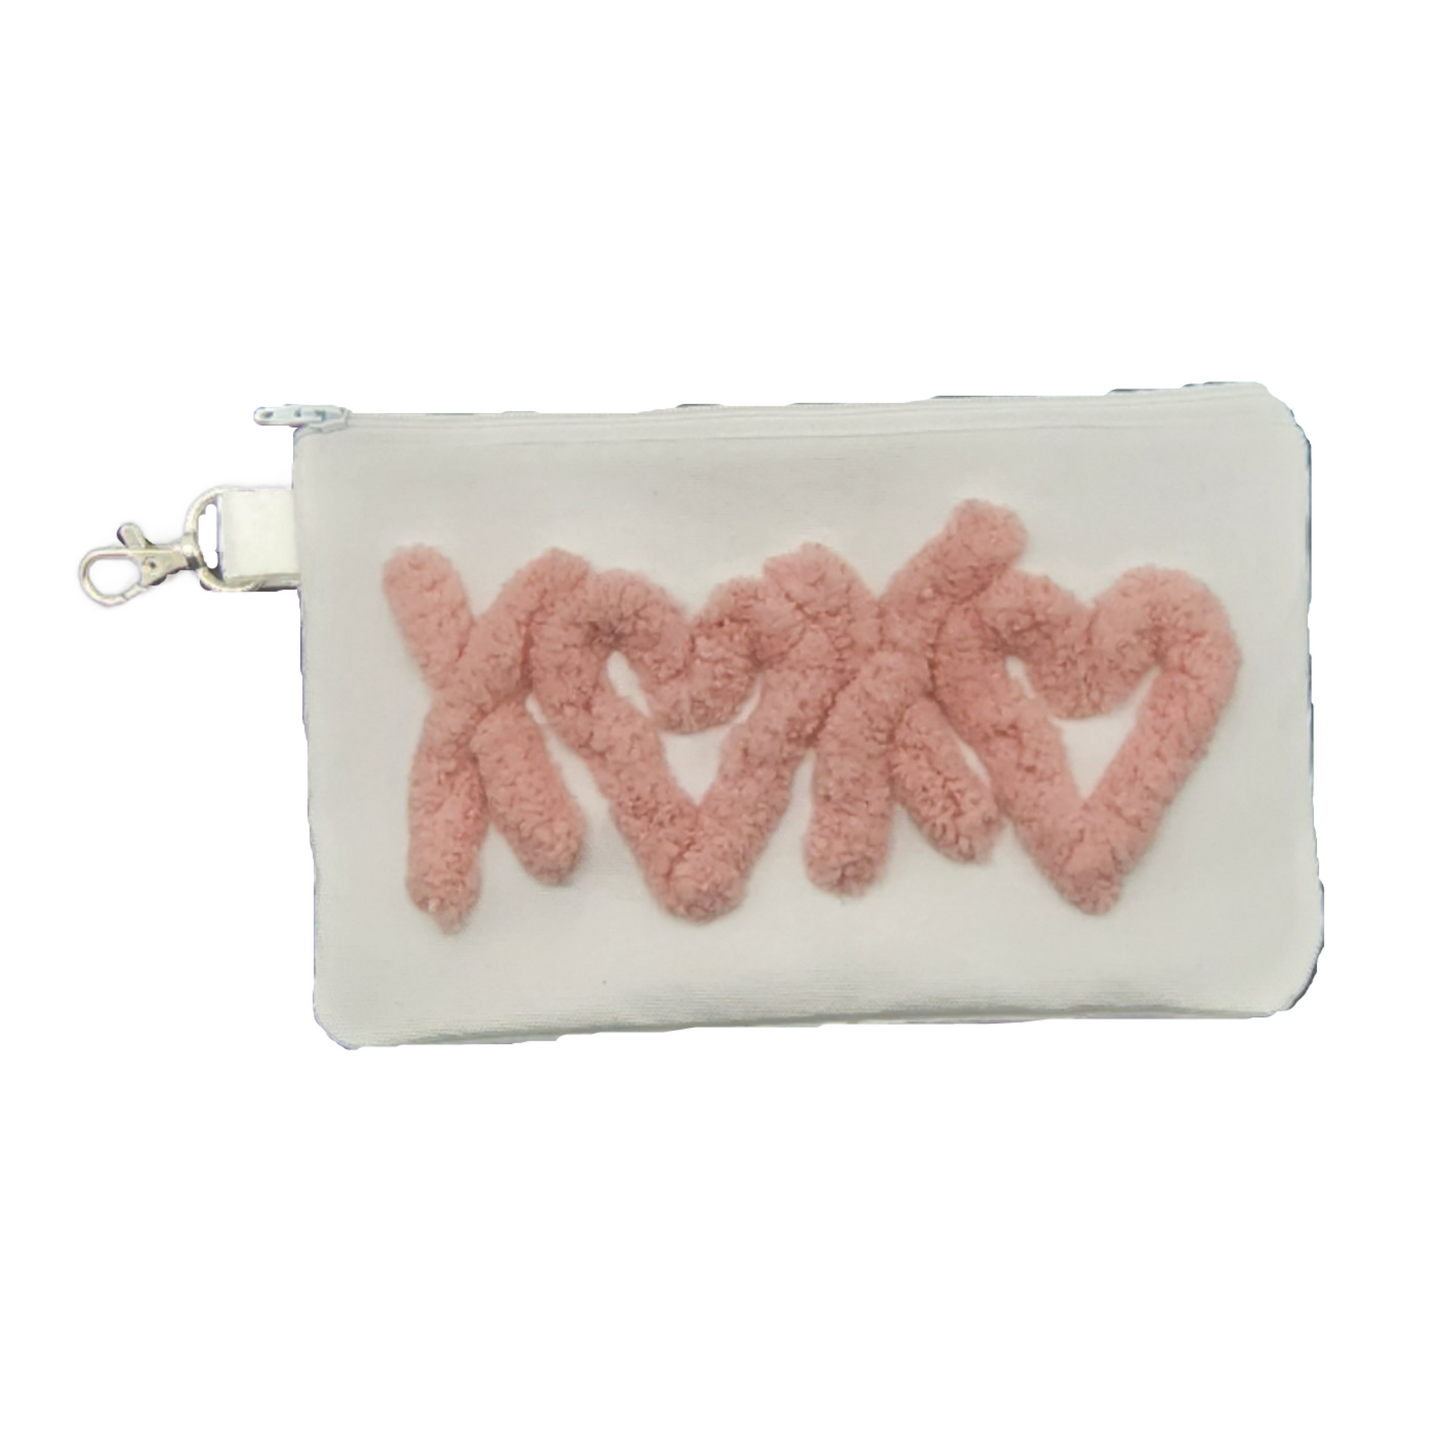 Top Zipper Lined Bag - XOXO Embroidered Yarn